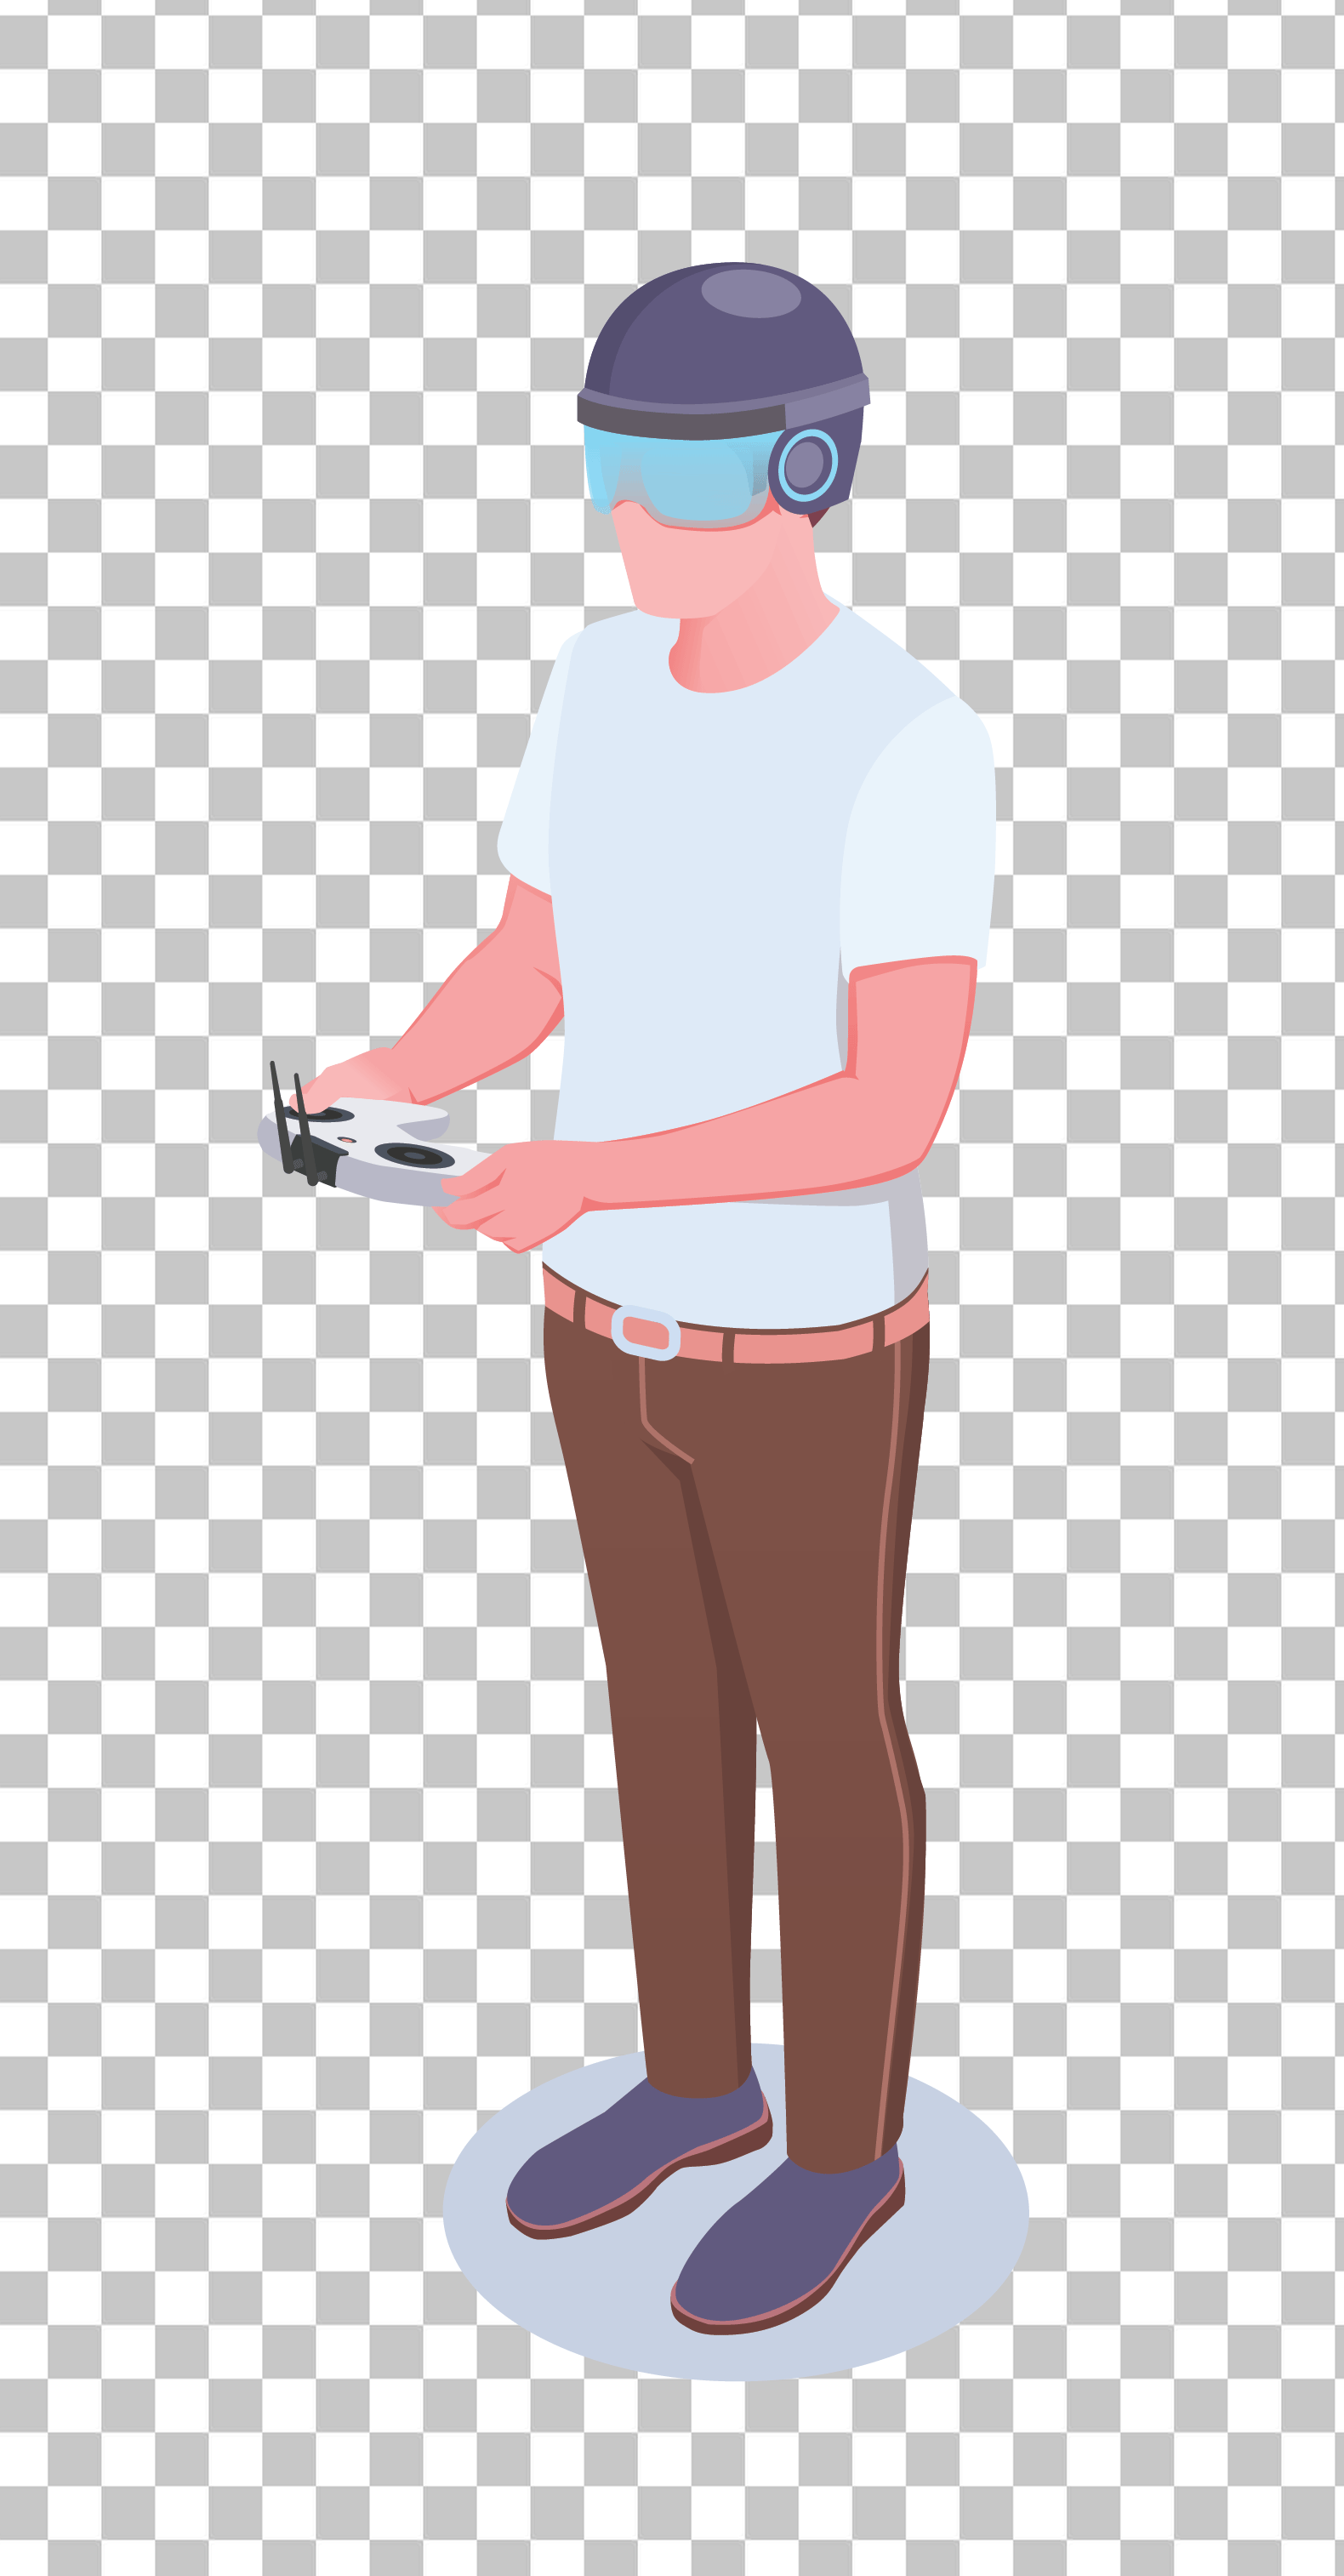 Man Controlling FPV Drone and wearing VR set PNG Image